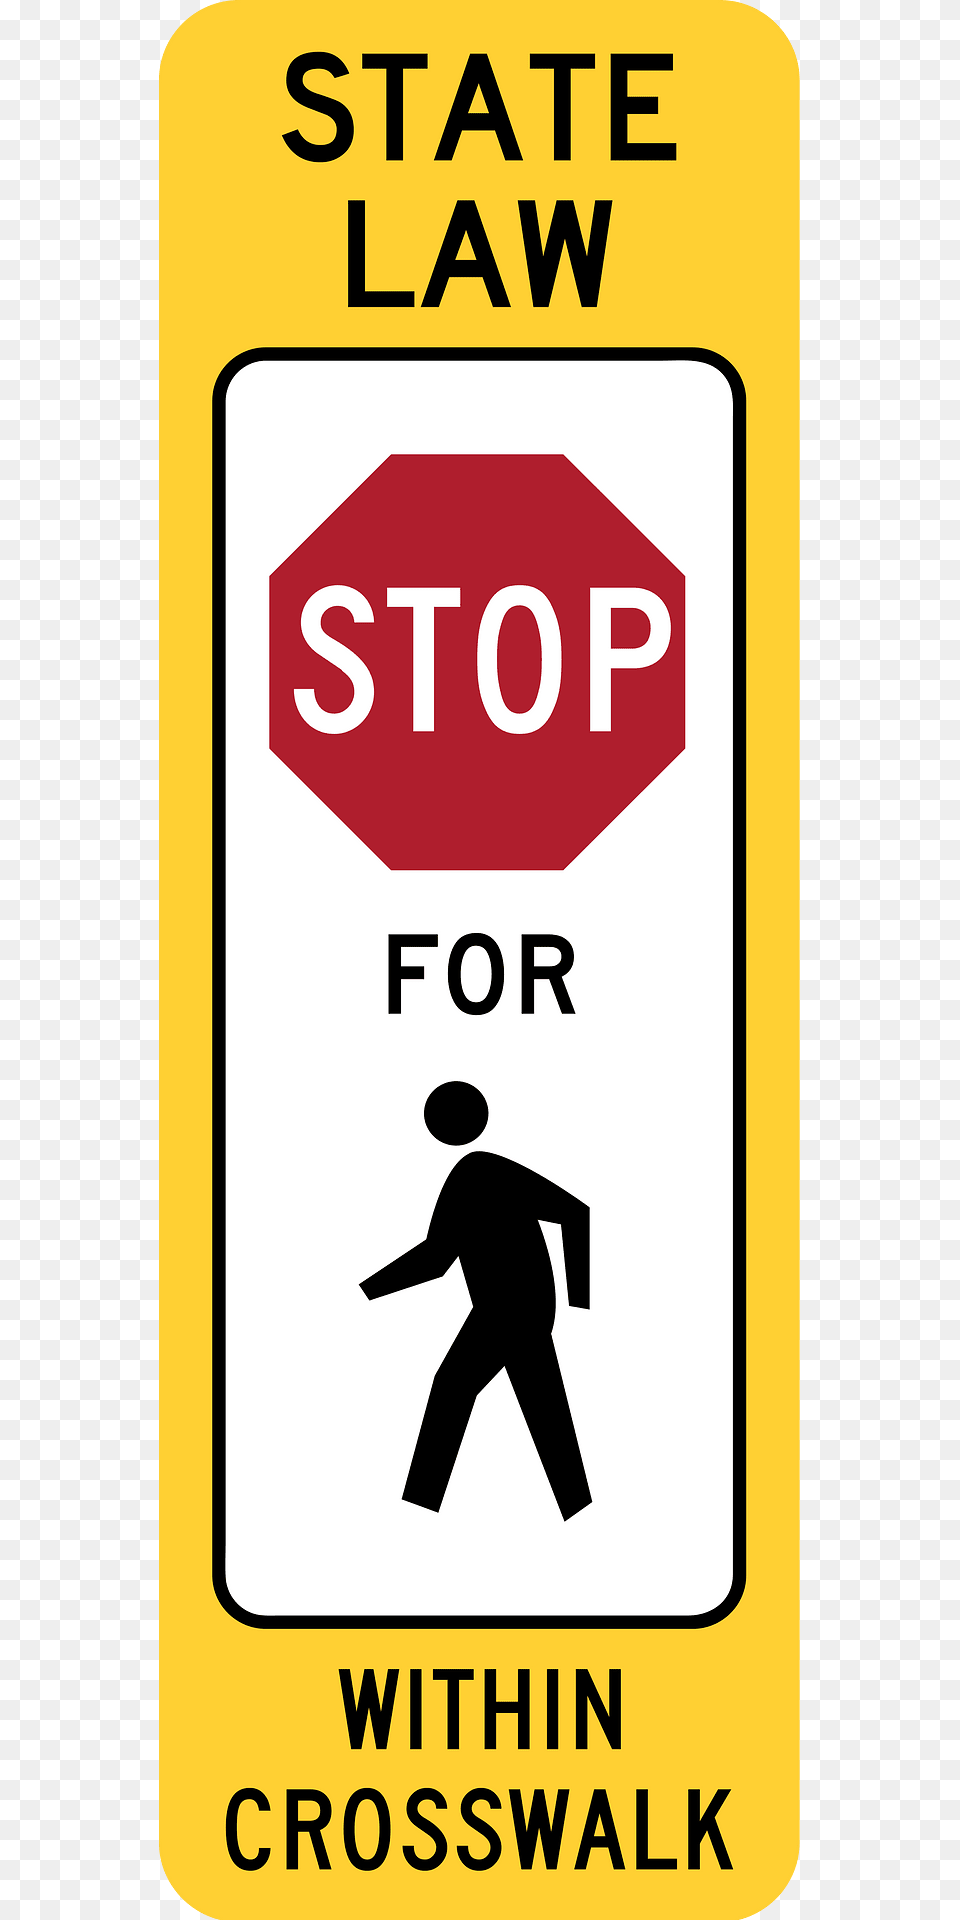 6a In Street Ped Crossing The Legend State Law Is Optional A Fluorescent Yellow Green Color May Be Used Instead Of Yellow For This Sign Clipart, Symbol, Road Sign, Adult, Male Png